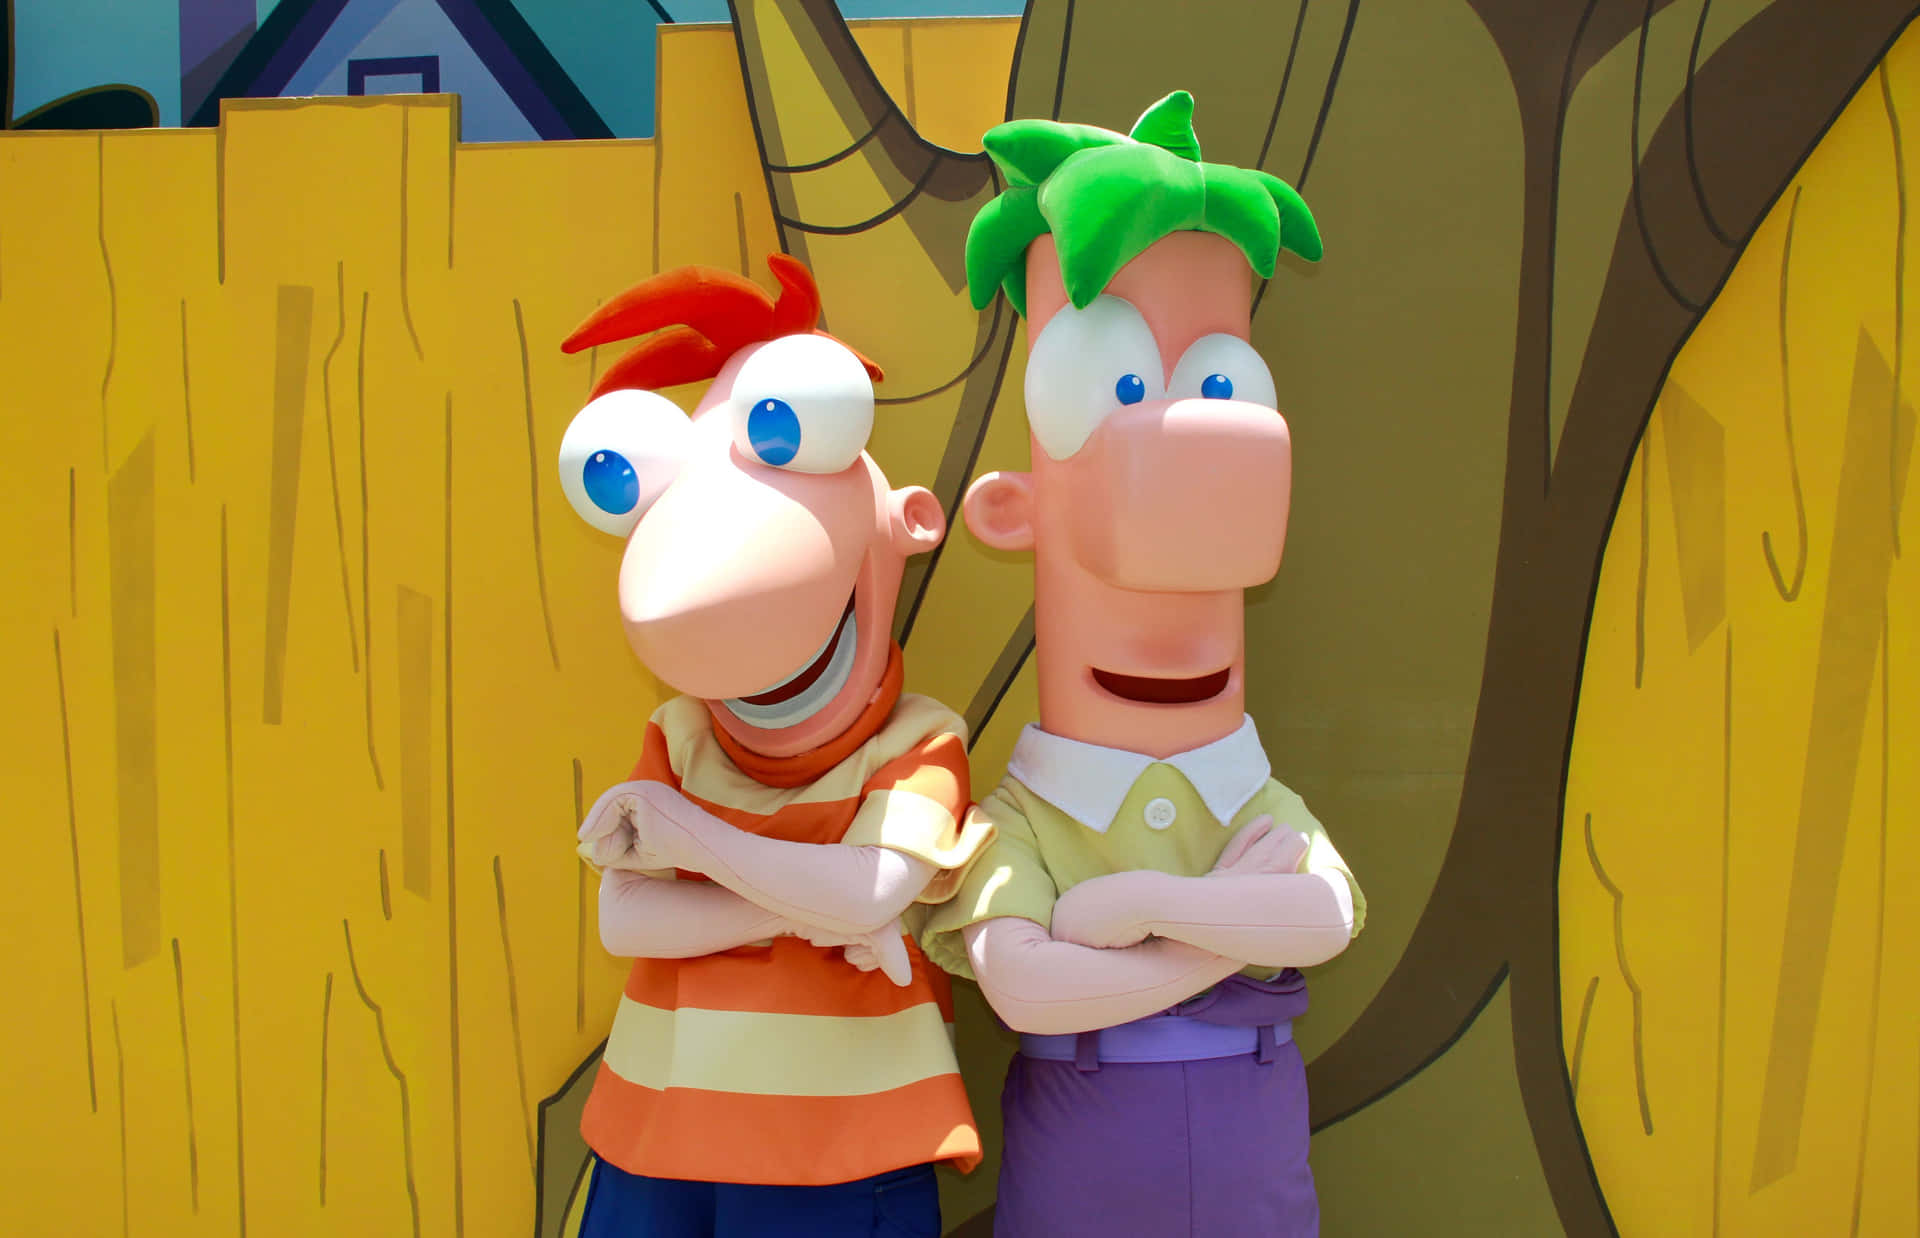 Phineas and Ferb embark on their latest adventure in this vibrant high-resolution image